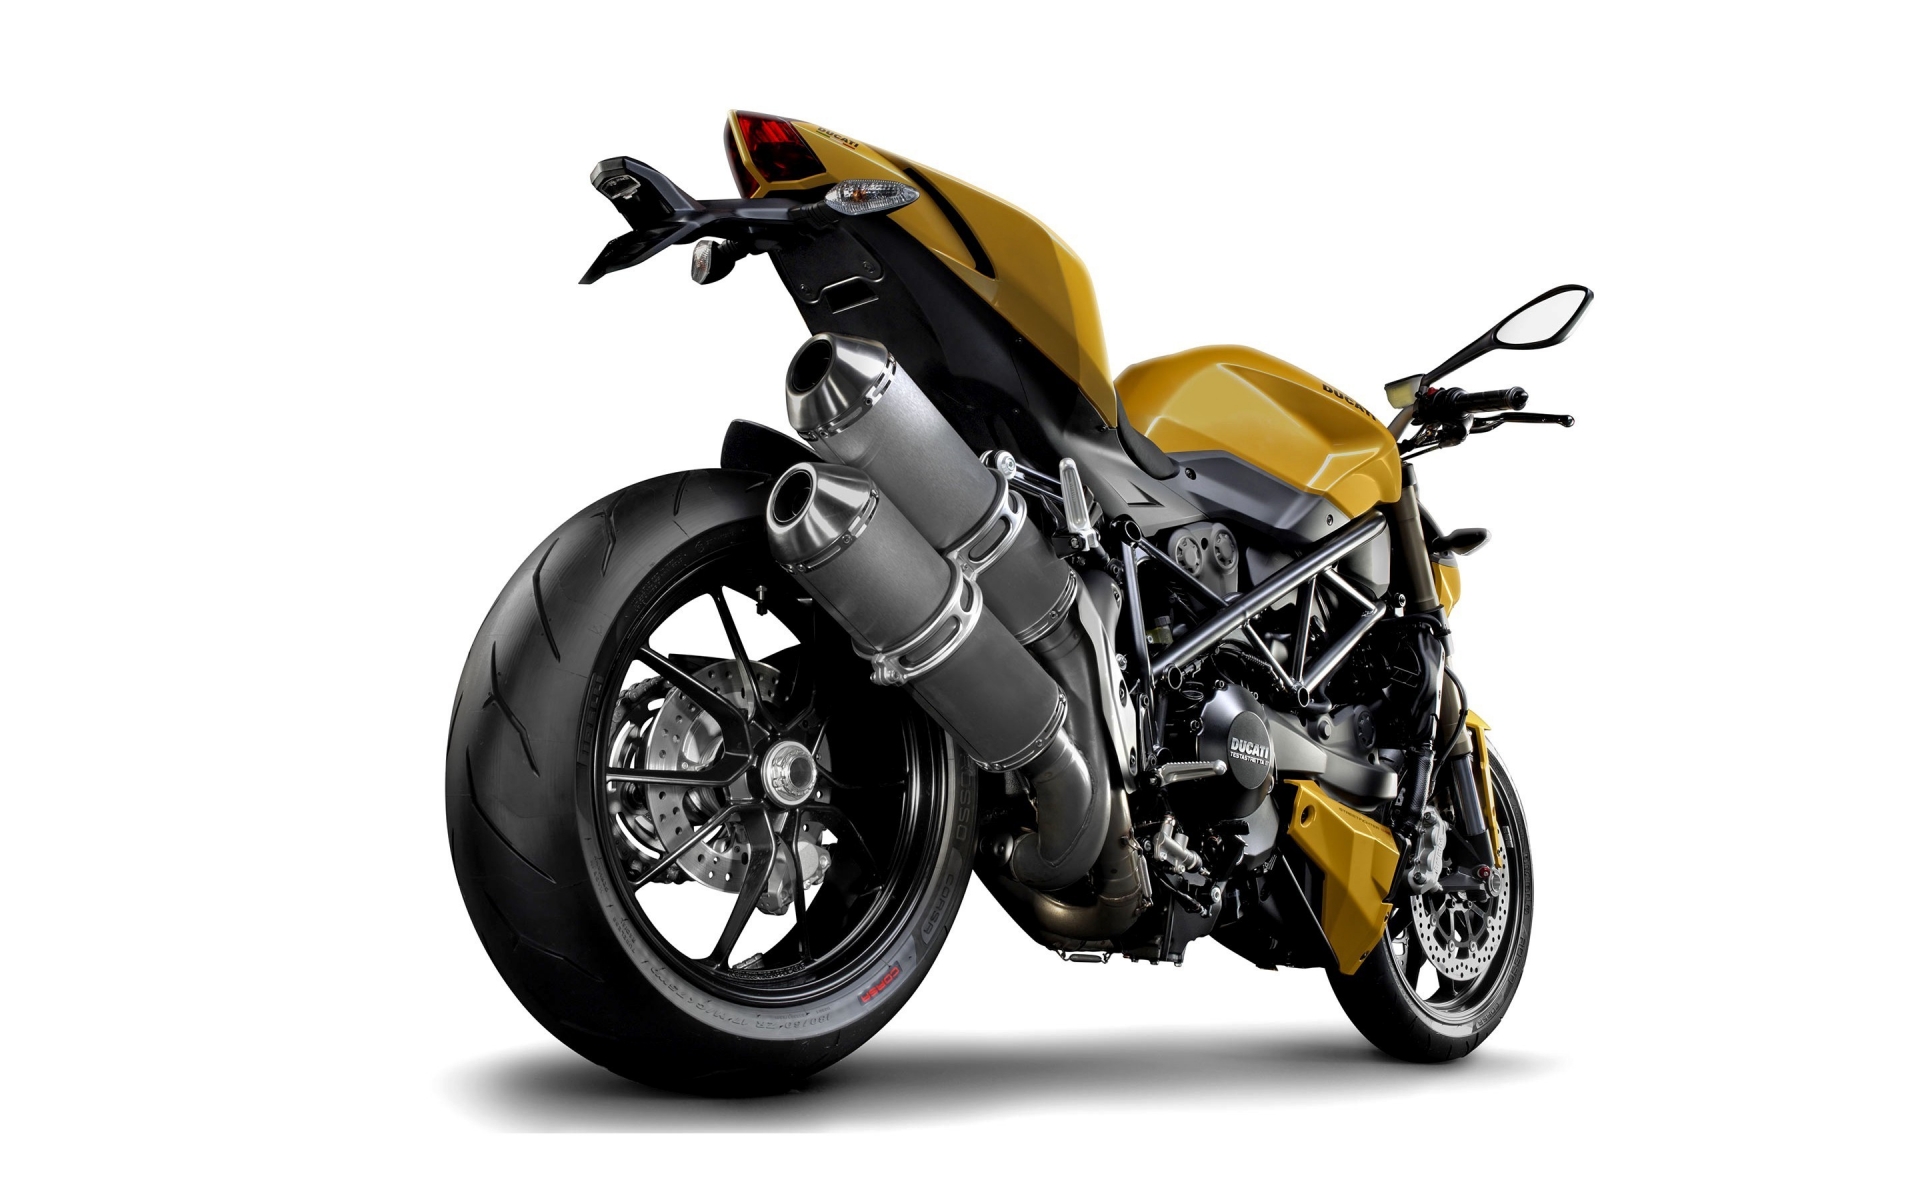  Ducati Streetfighter Rear for 1920 x 1200 widescreen resolution